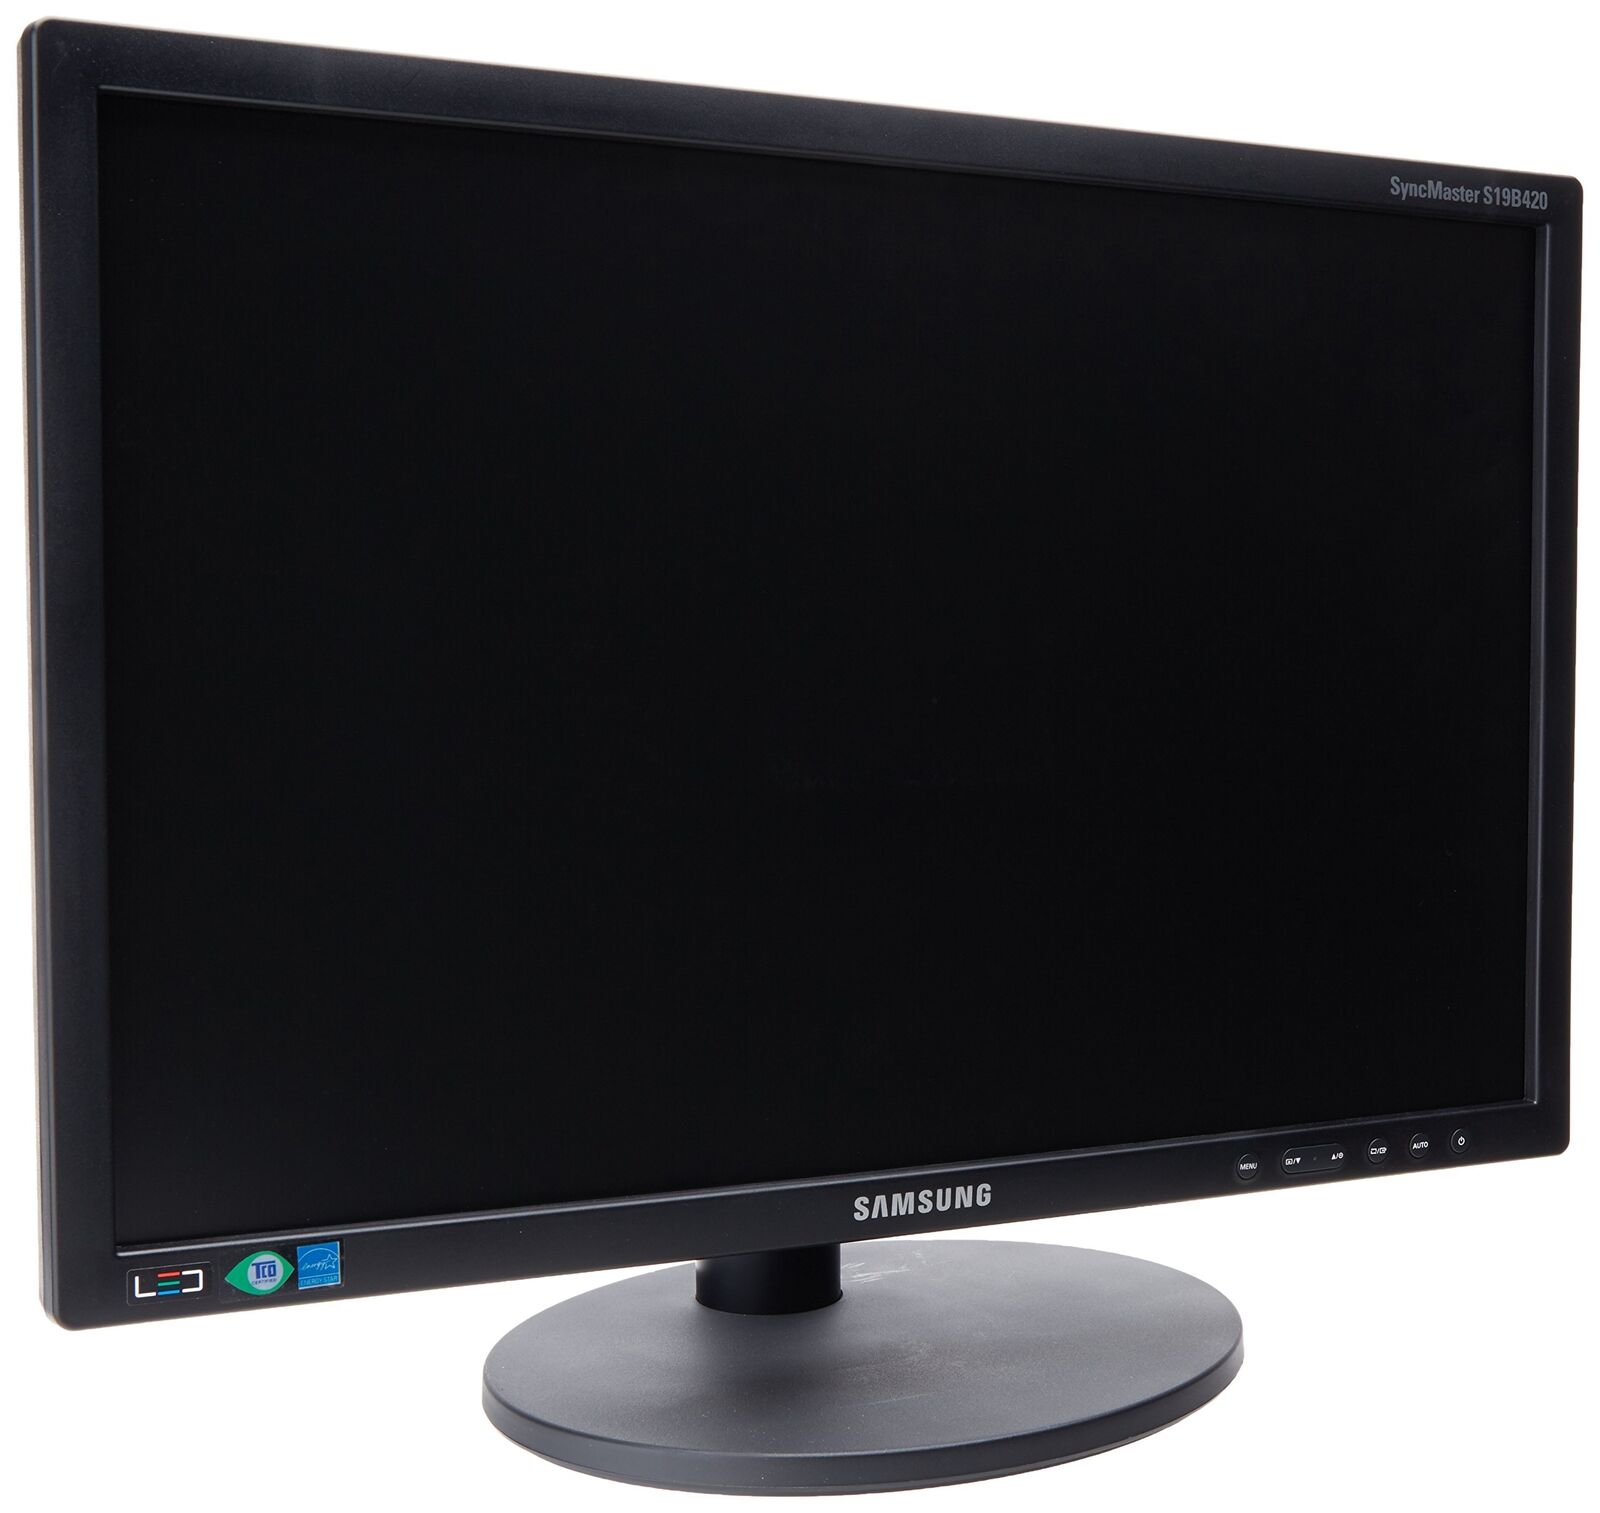 Samsung S19B420BW 420 Series SyncMaster 19-Inch LED LCD Monitor Open Box